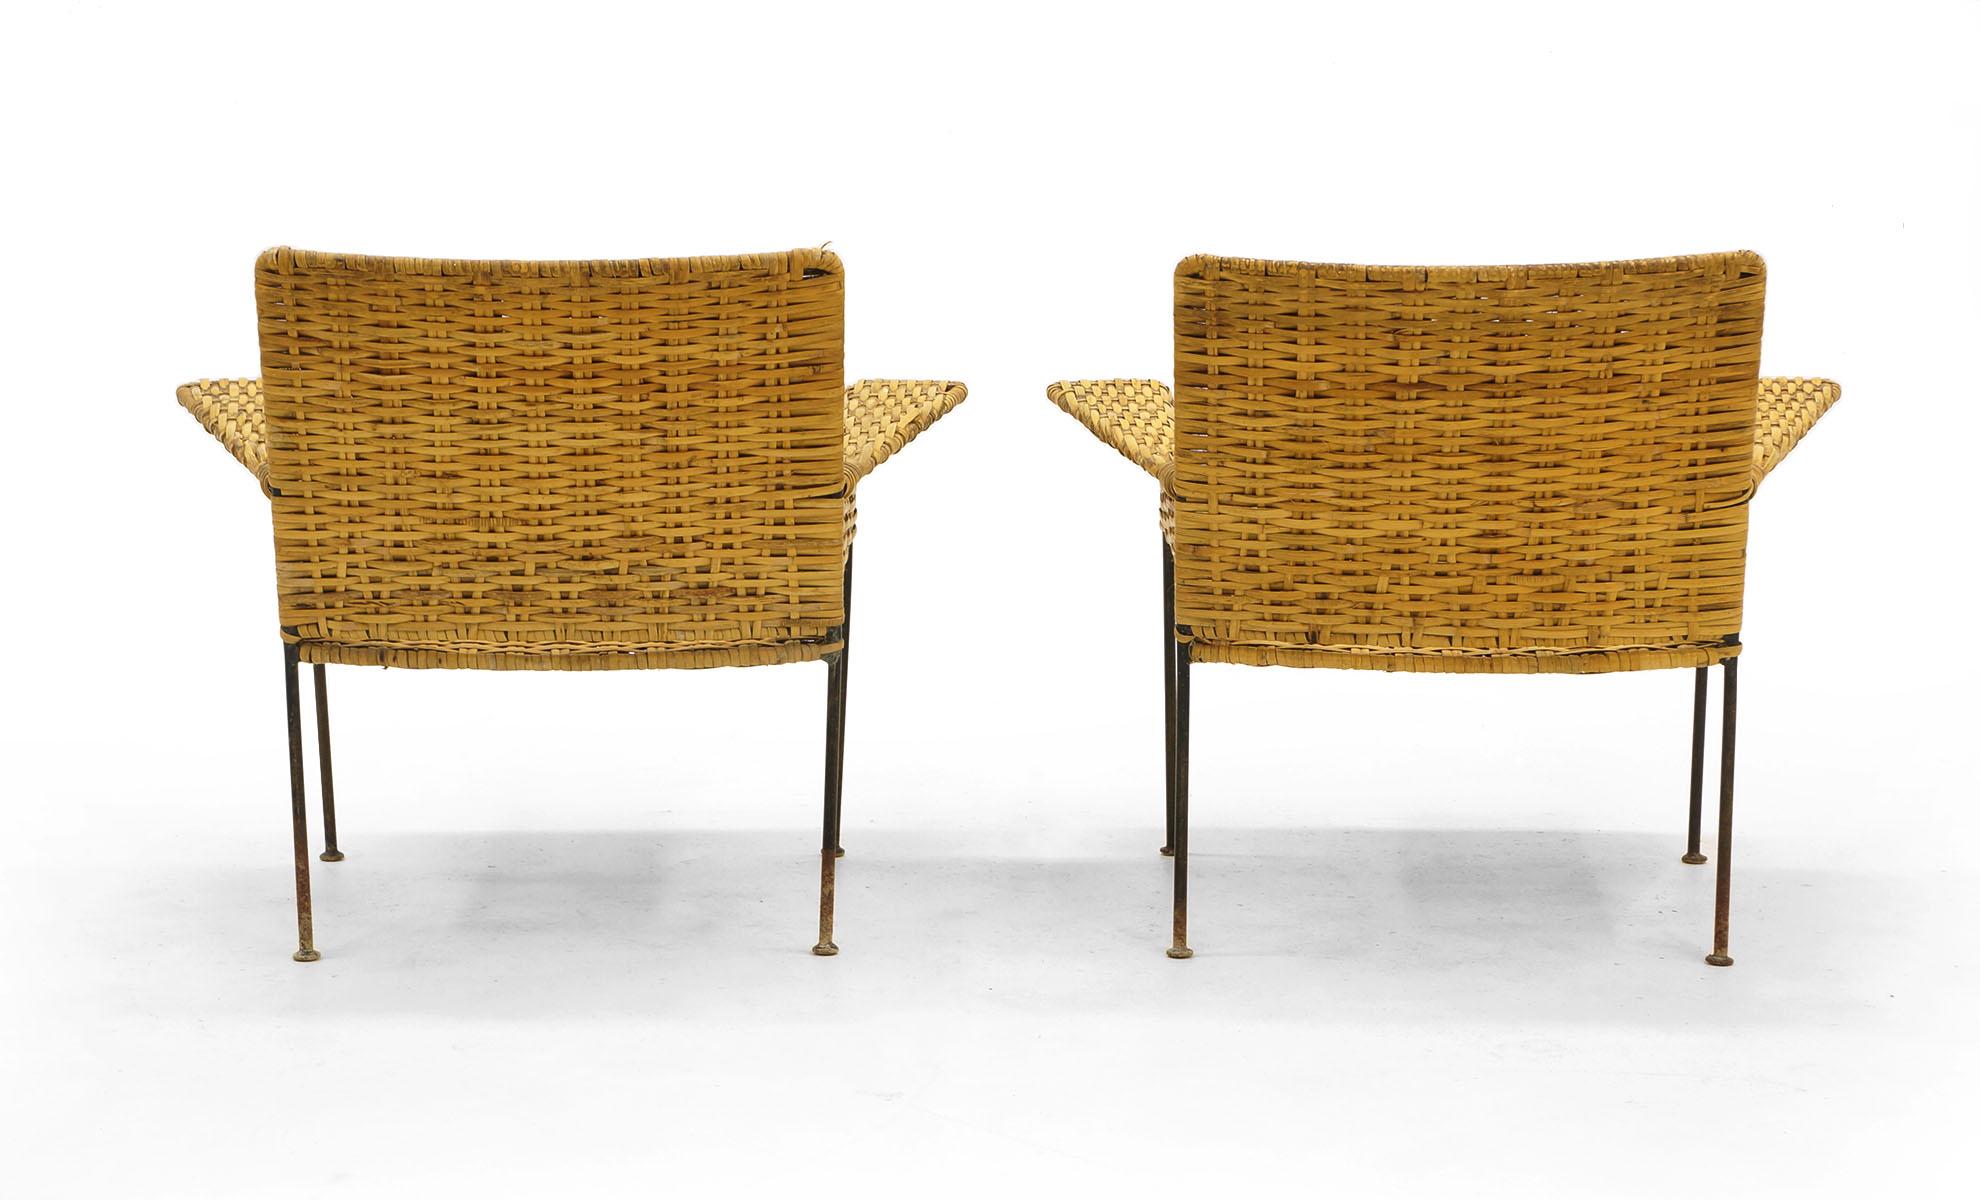 American Pair of Wicker and Wrought Iron Chairs by Van Keppel and Green, 1950s